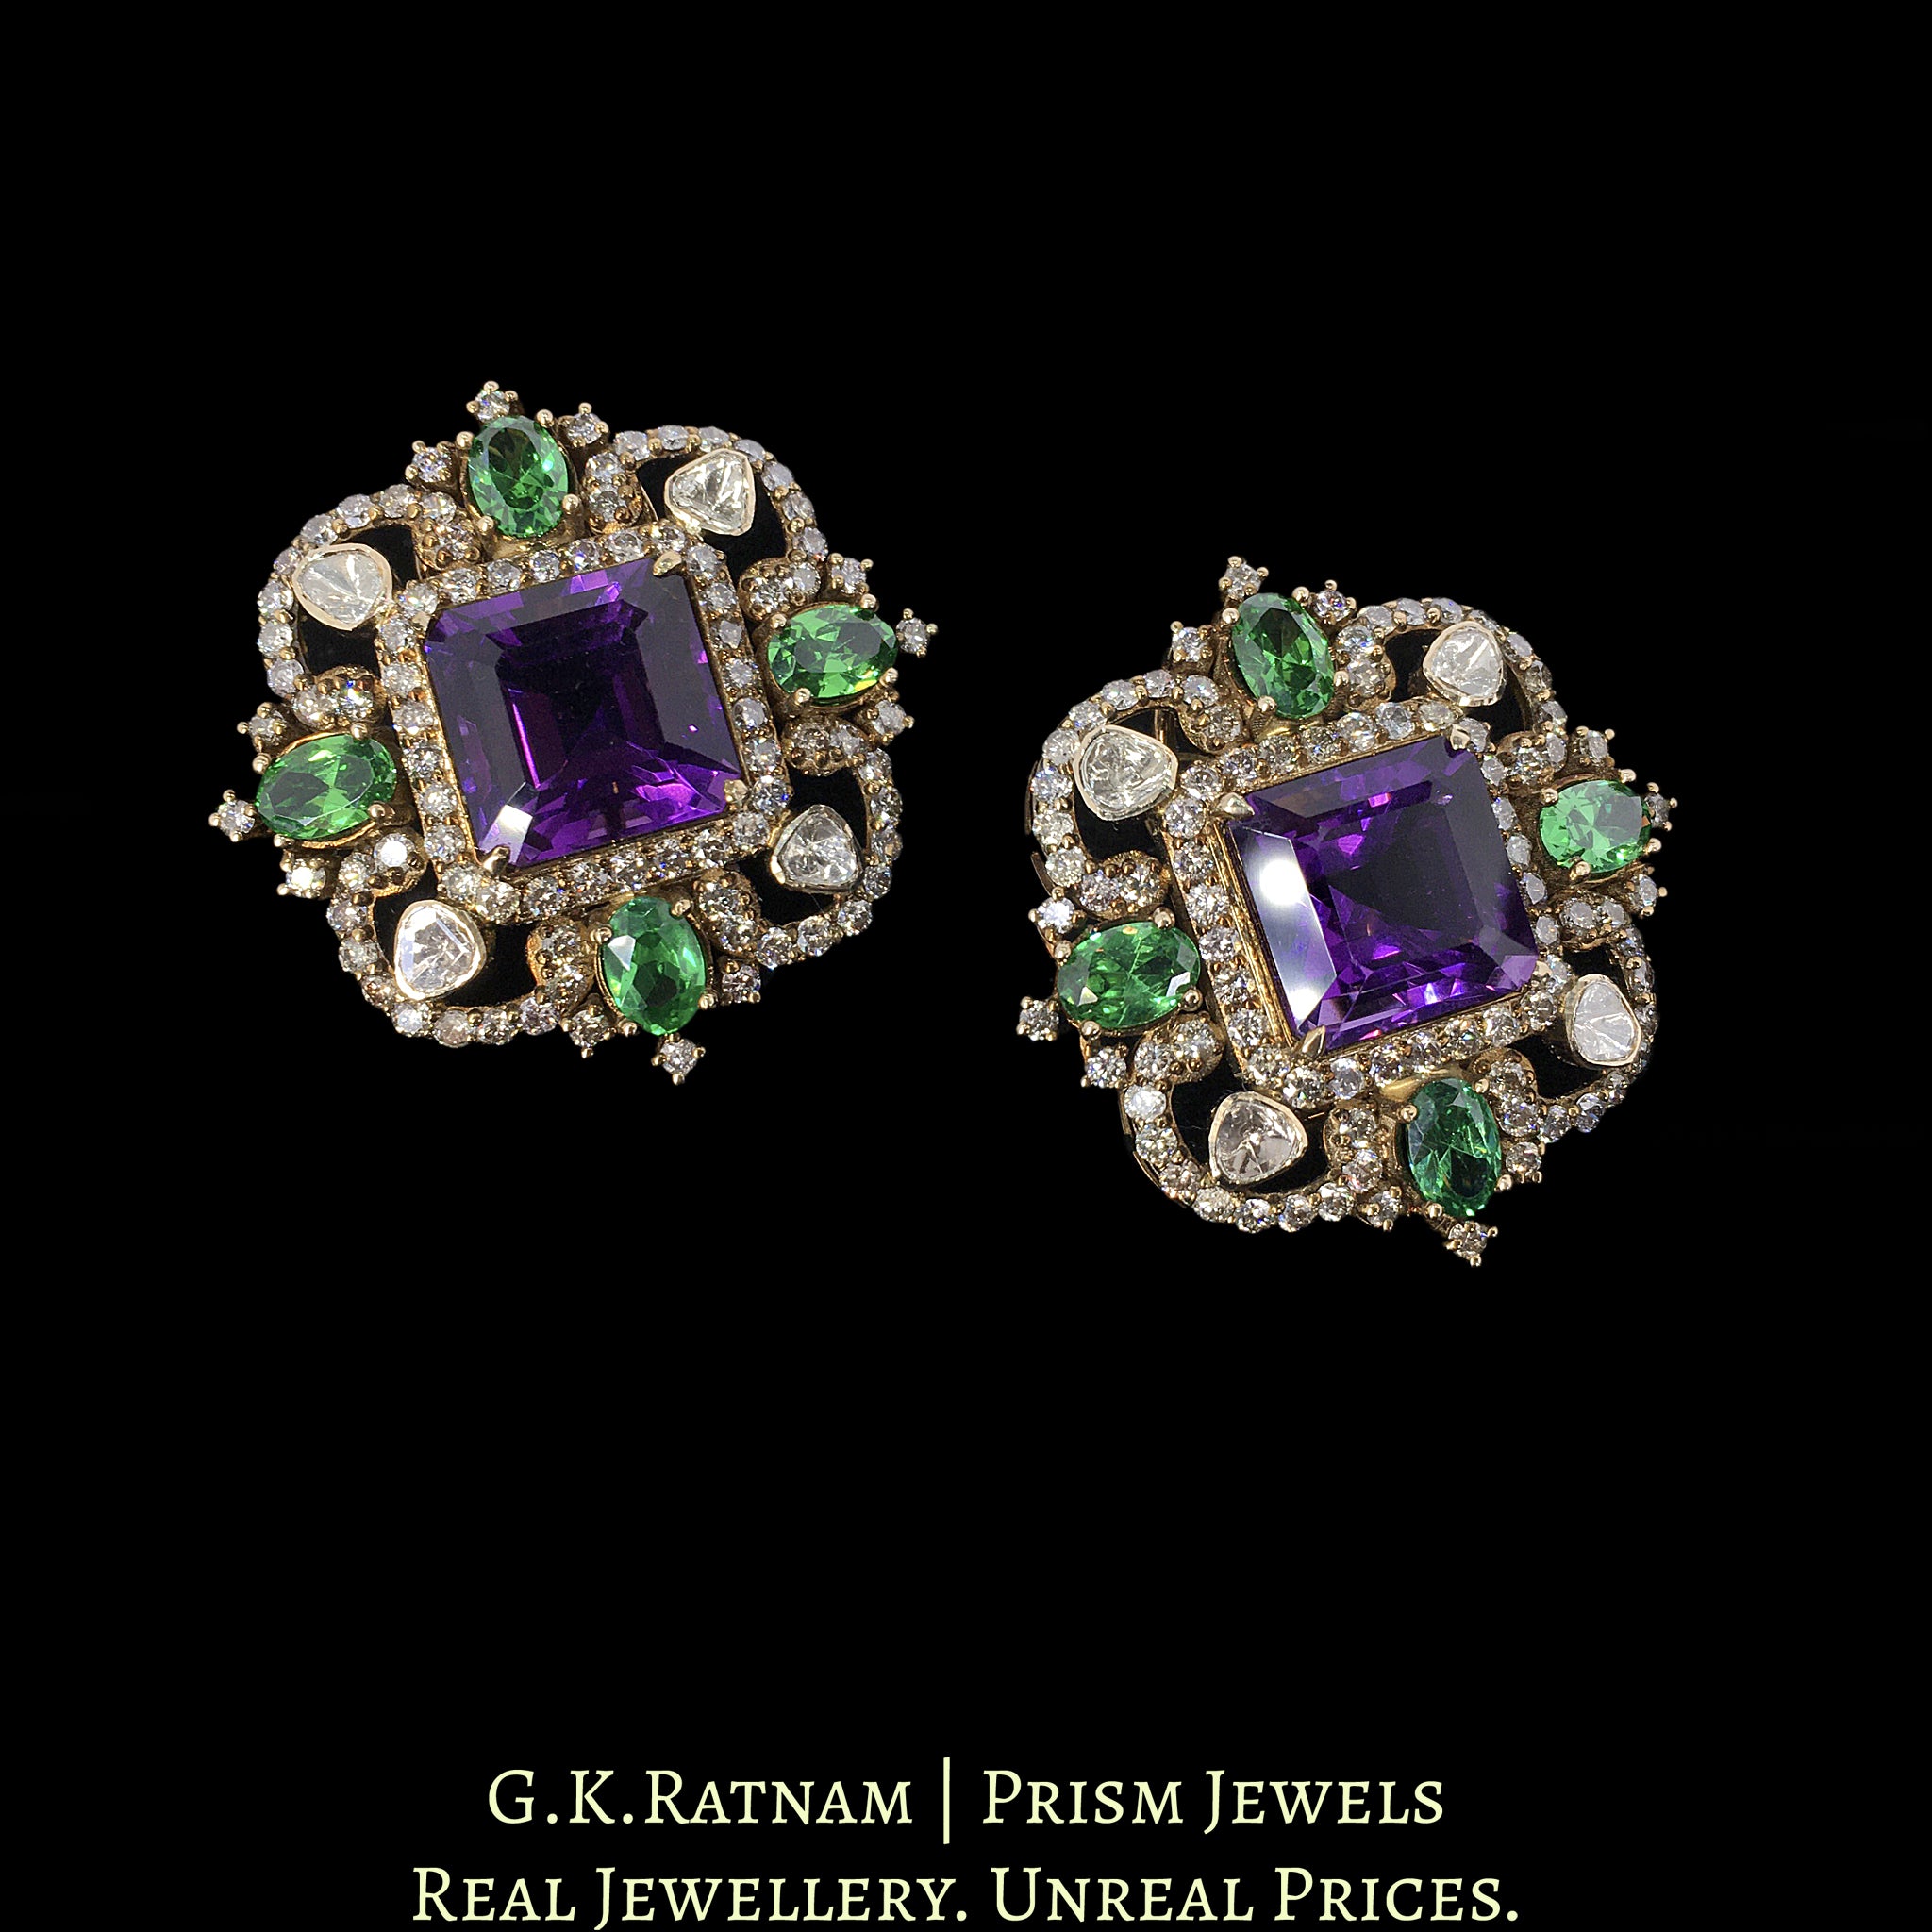 14k Gold and Diamond Polki Open Setting Karanphool Earring Pair with Amethysts and Emeralds